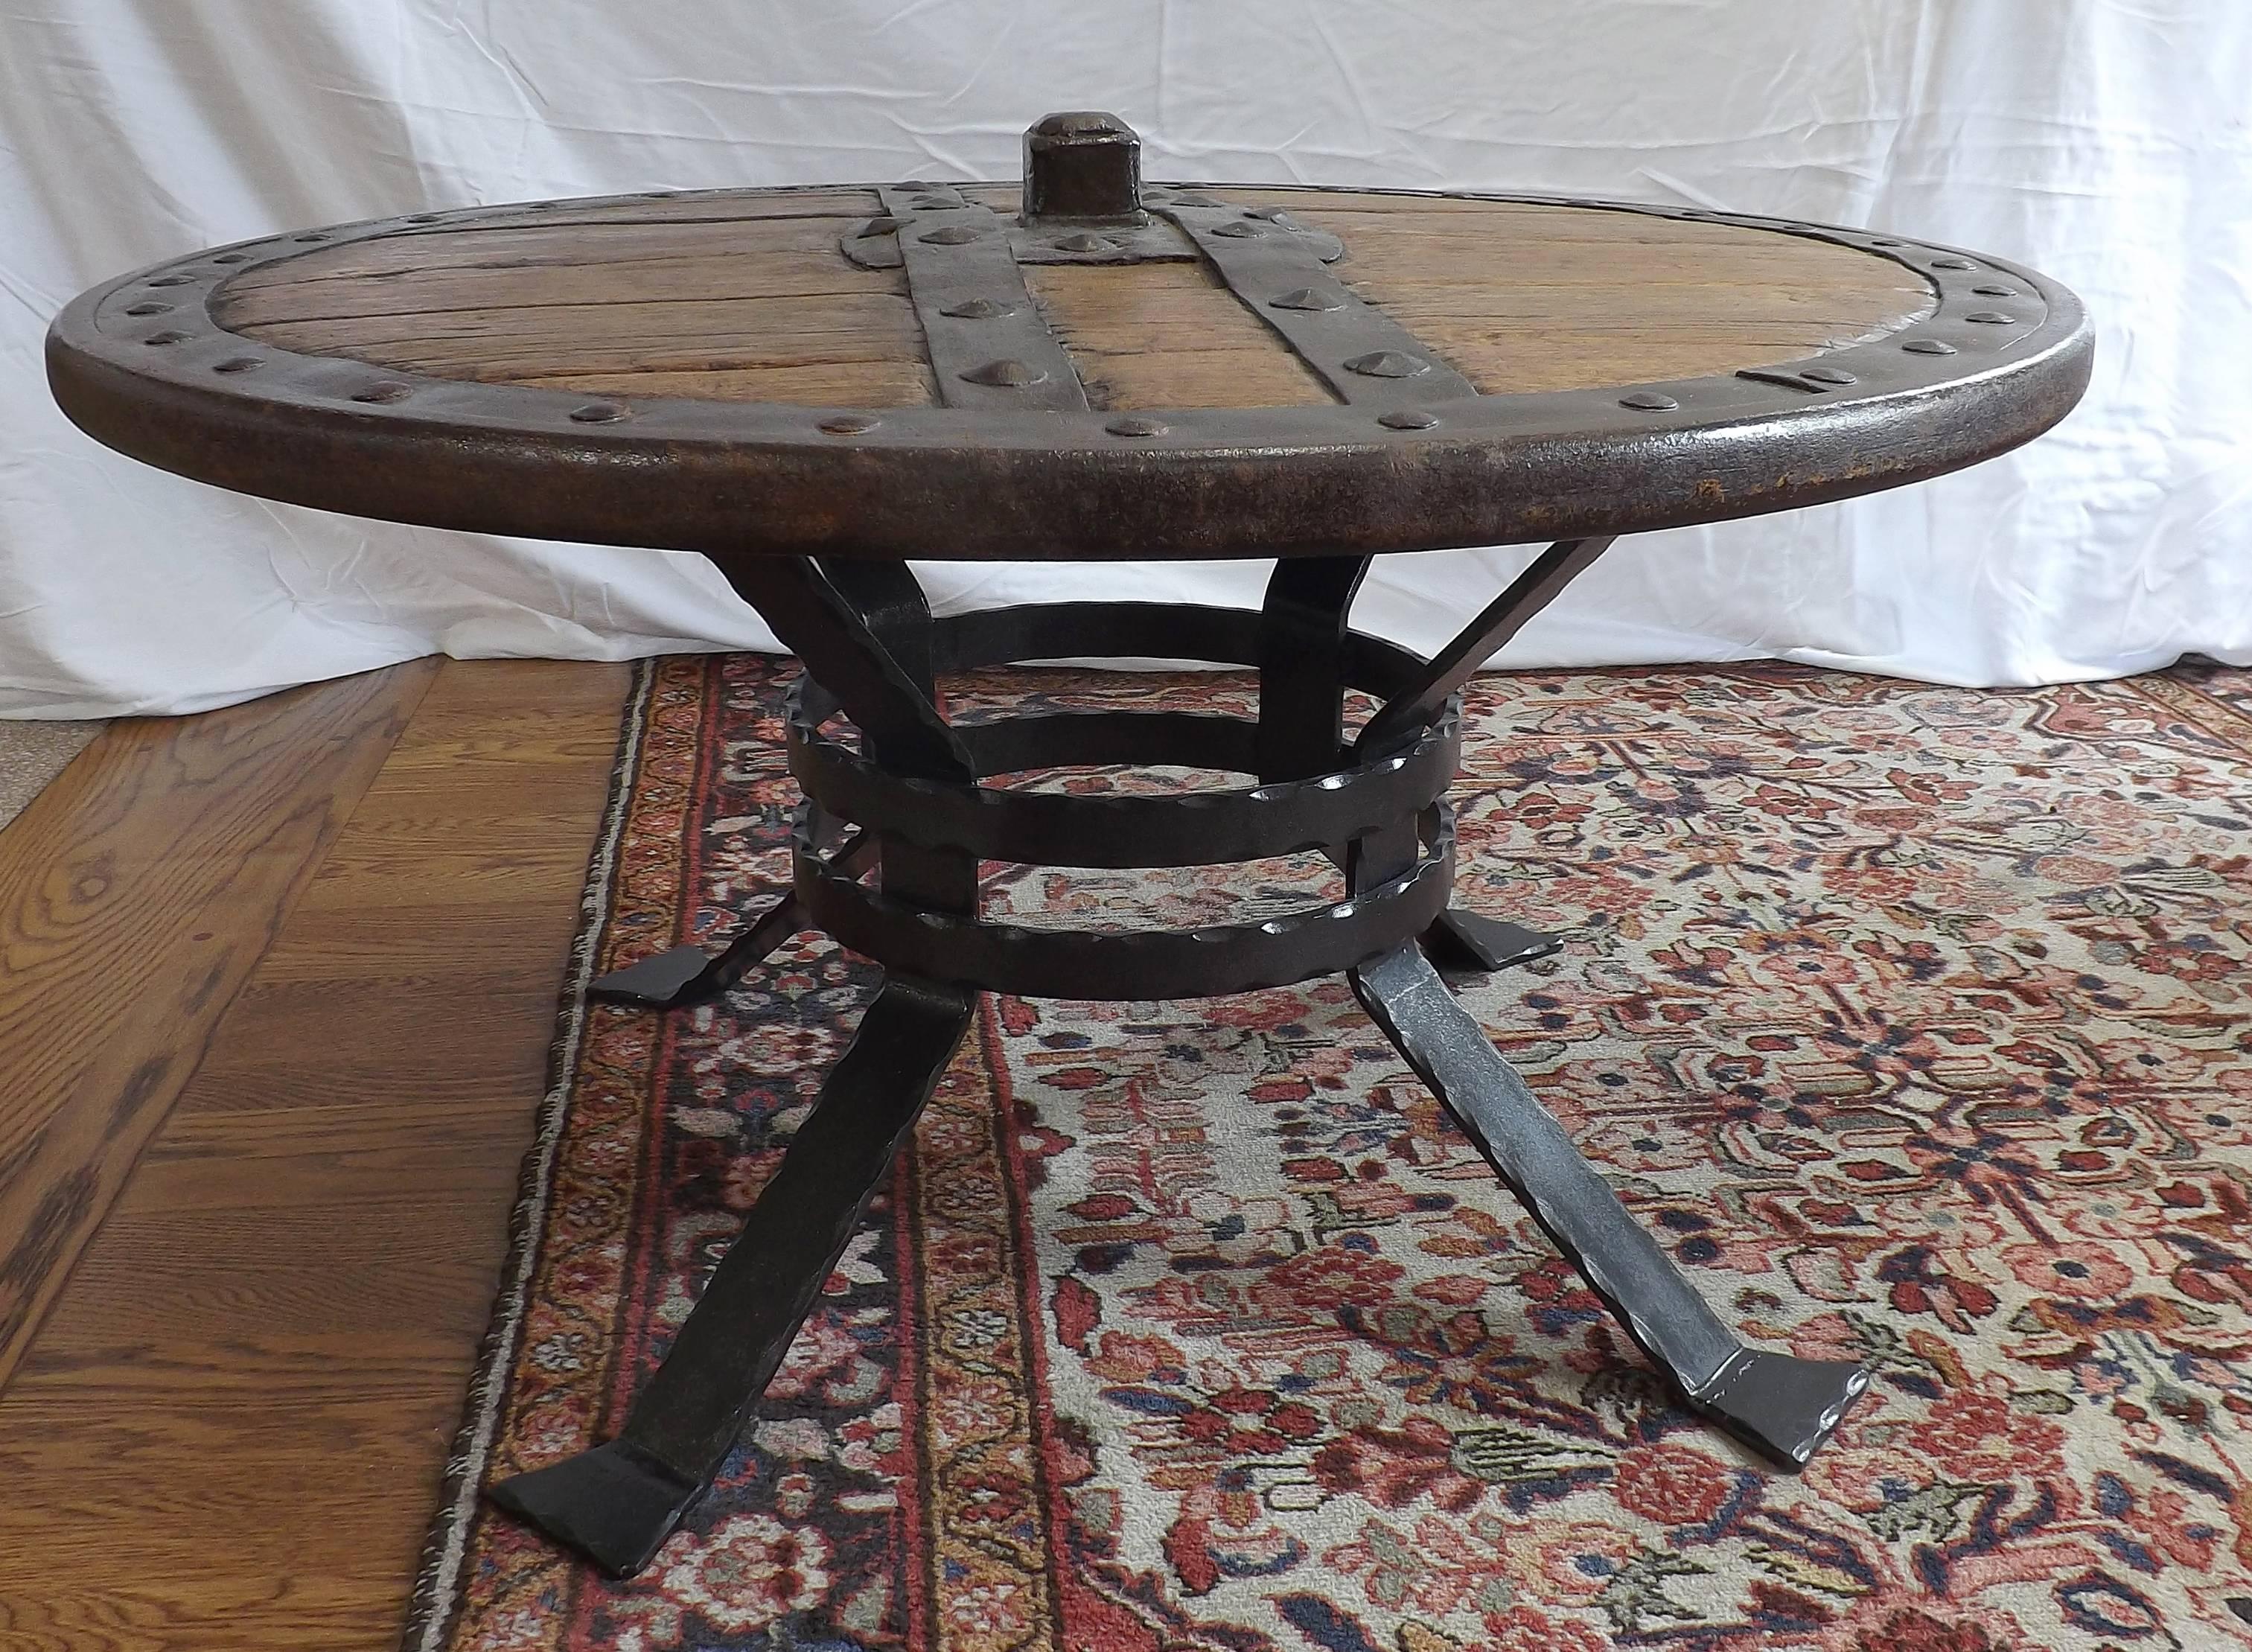 Heavy sturdy wheel dating from the middle ages of European origin. Hand-forged riveted rim with iron cross straps on both sides. The tabletop is 18 inches tall at the edge and a diameter of 33 1/20 inches. Also included is a handsome recently